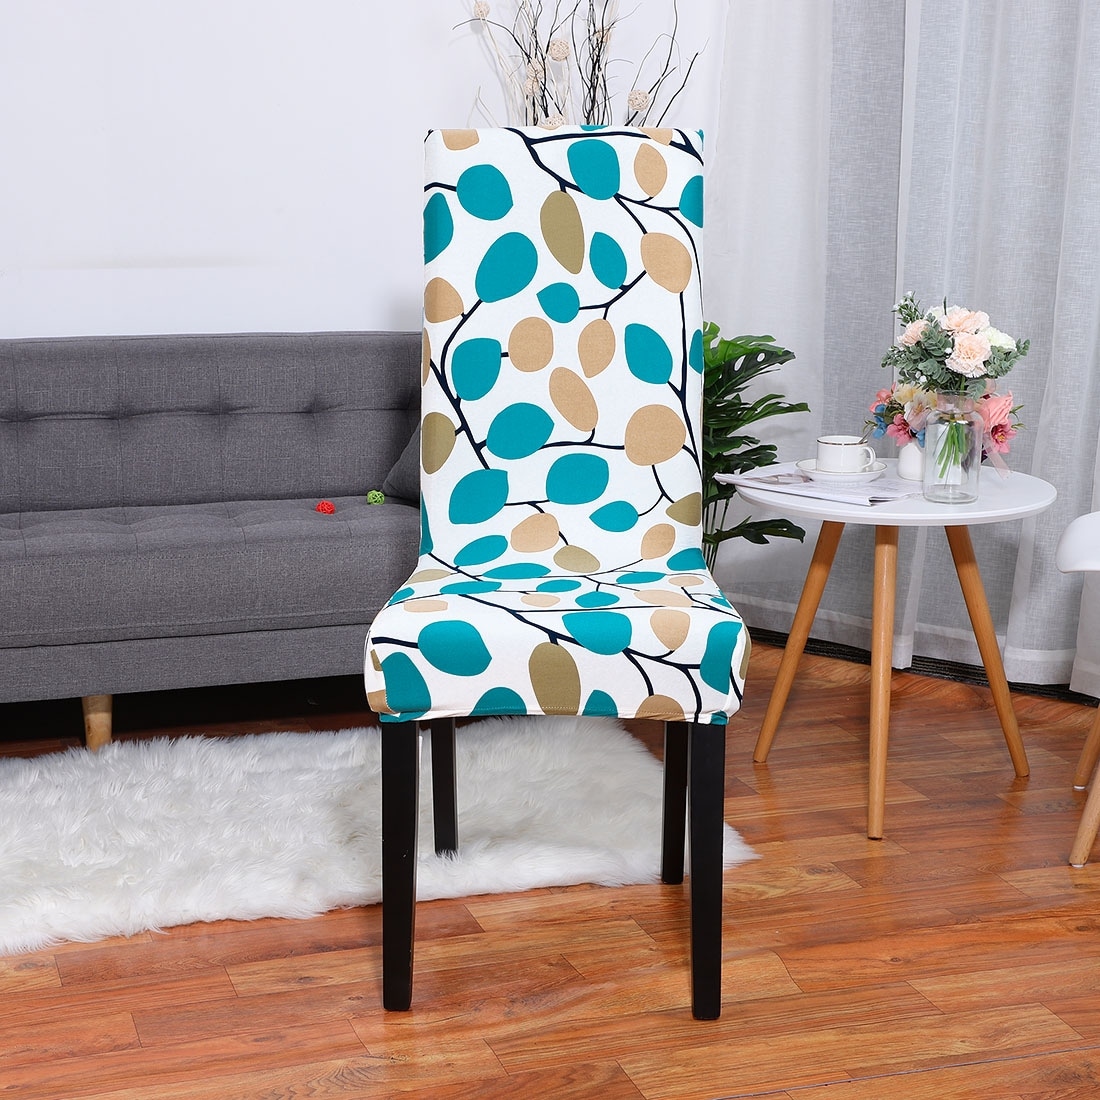 1pc Removable Floral Dining Room Chair Covers Wedding Stretch Seat Cover Decor Z 